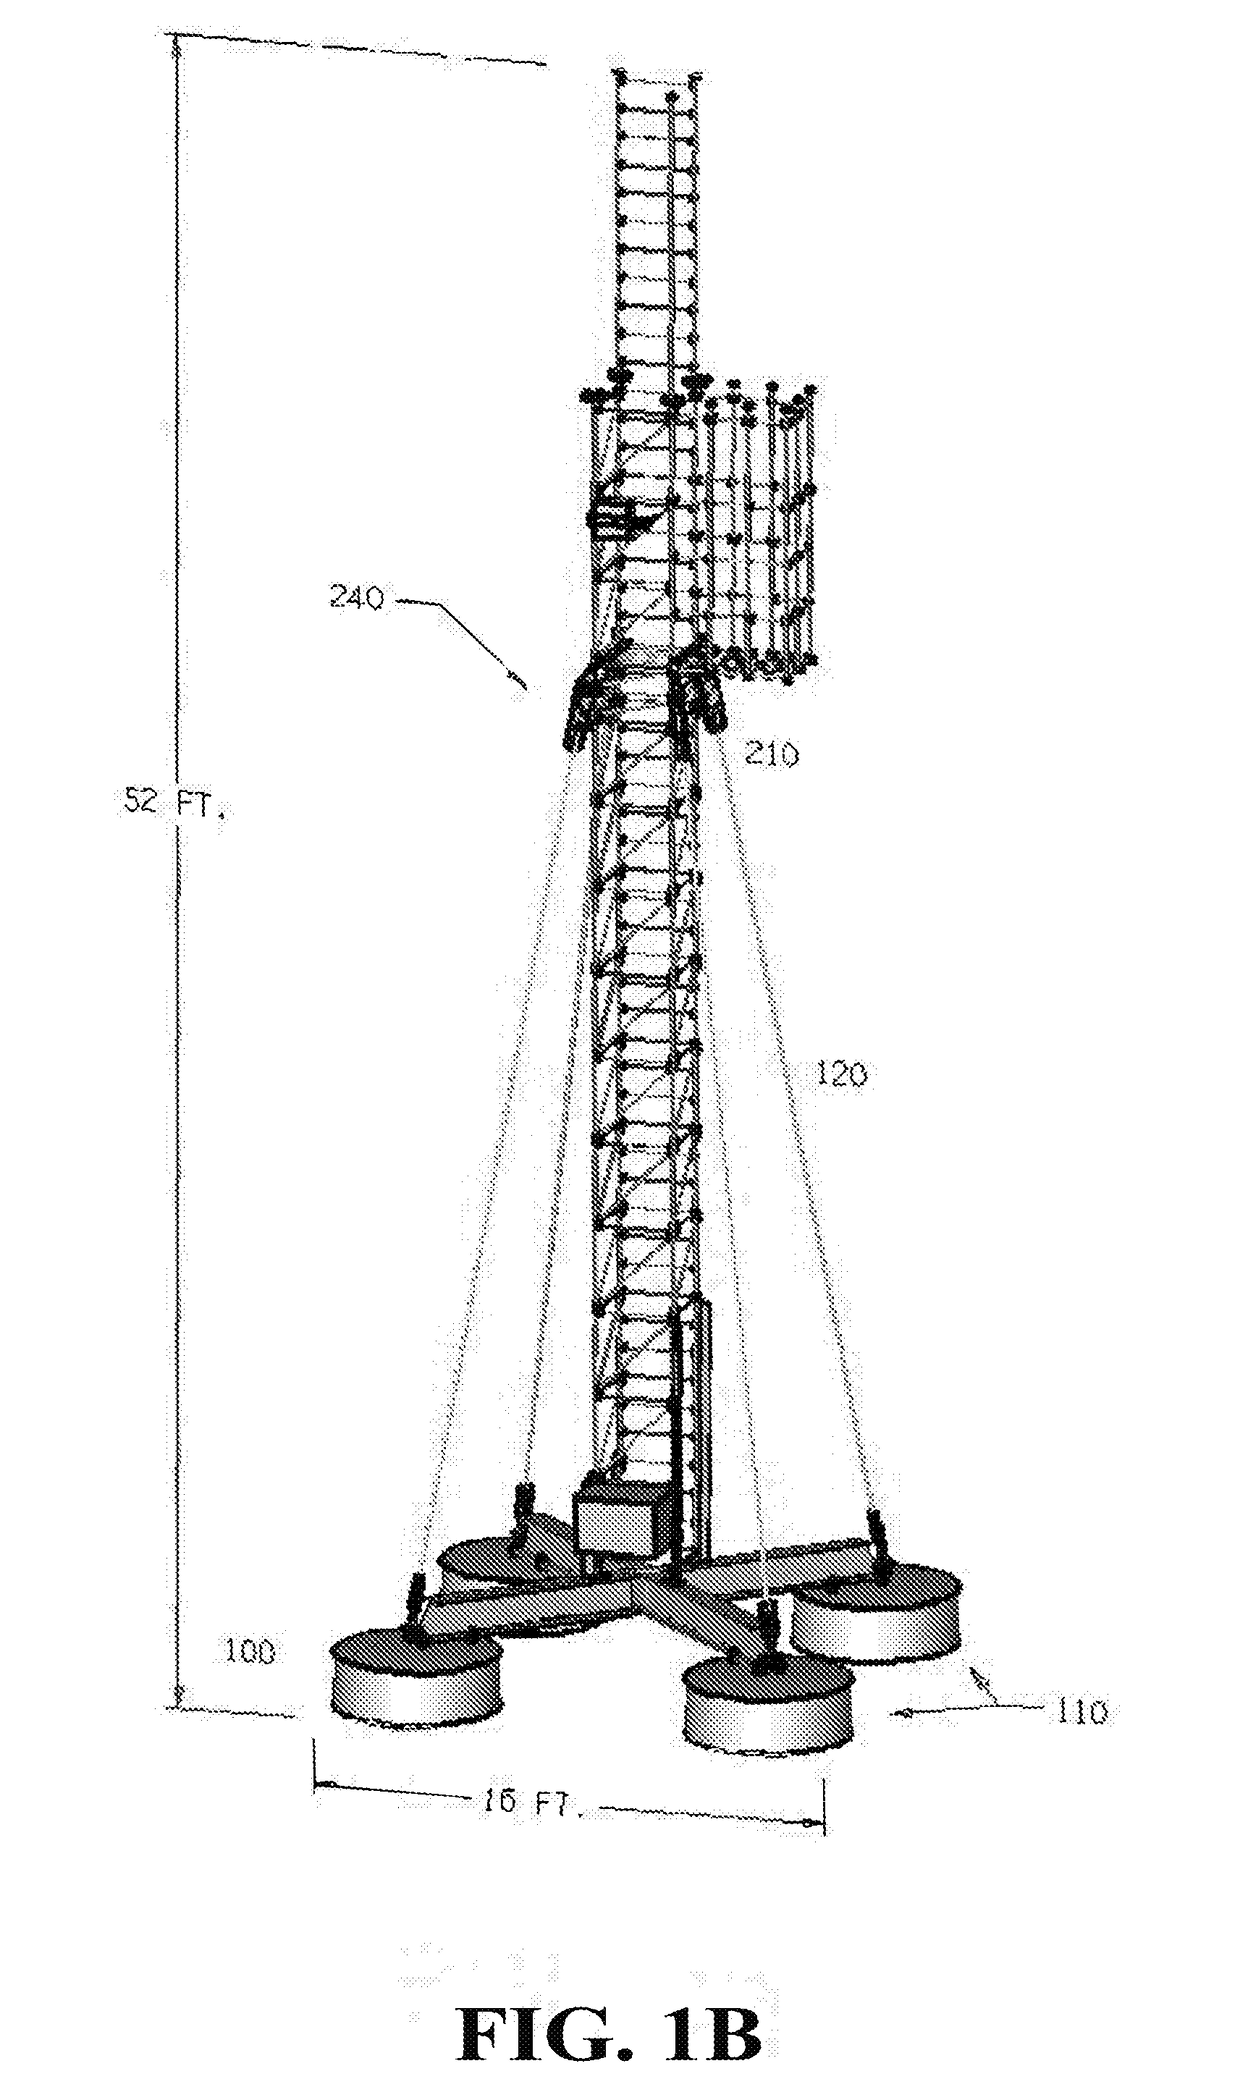 Systems and methods for self-standing, self-supporting, rapid-deployment, movable communications towers